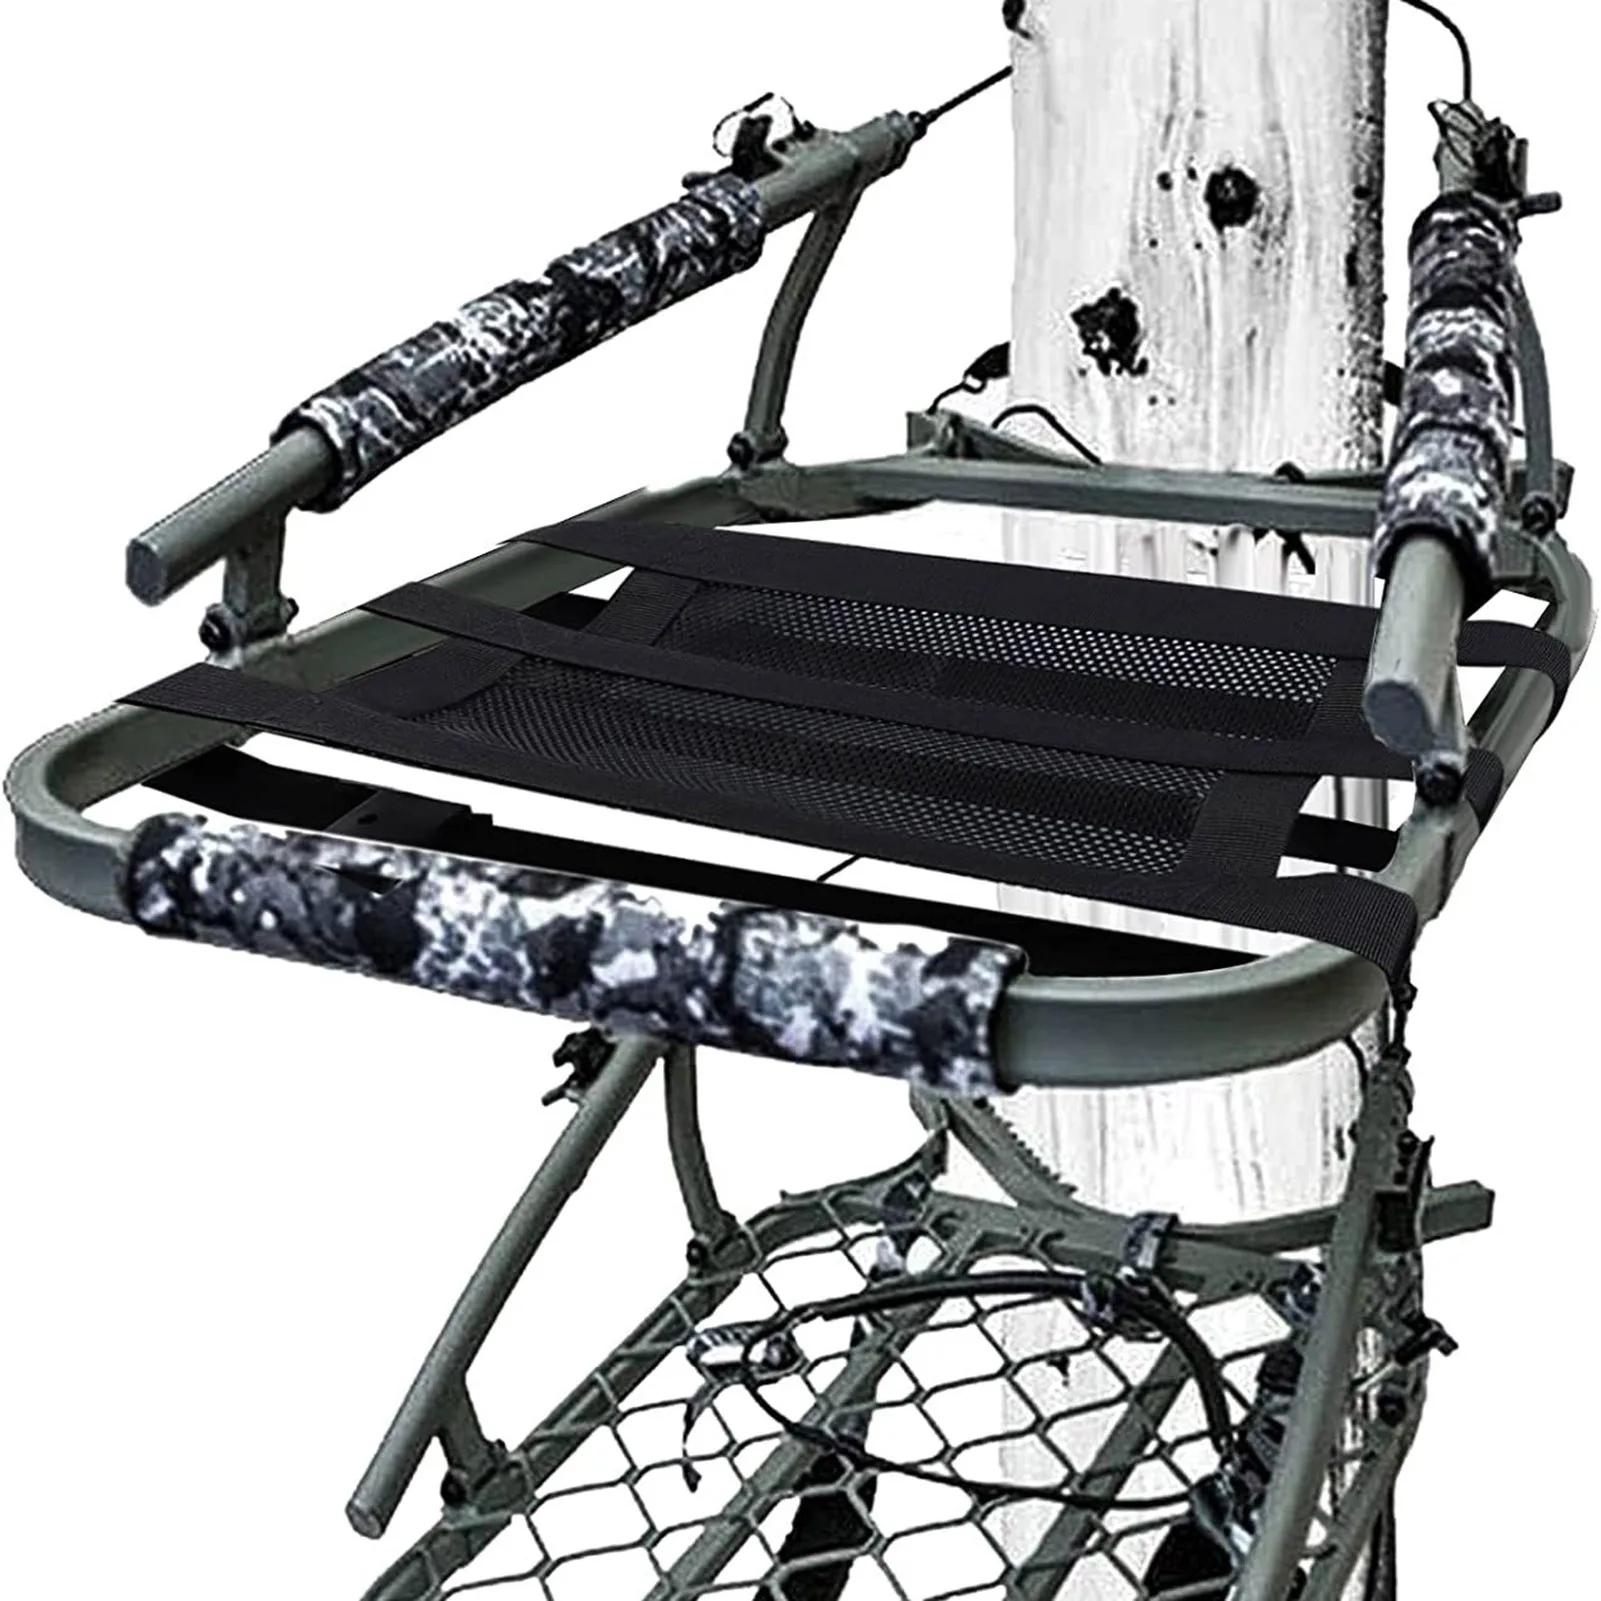 

Ladder Stands Seat Cushion Outdoor Stand Seat Replacement Foldable and Lightweight Shooting Accessories